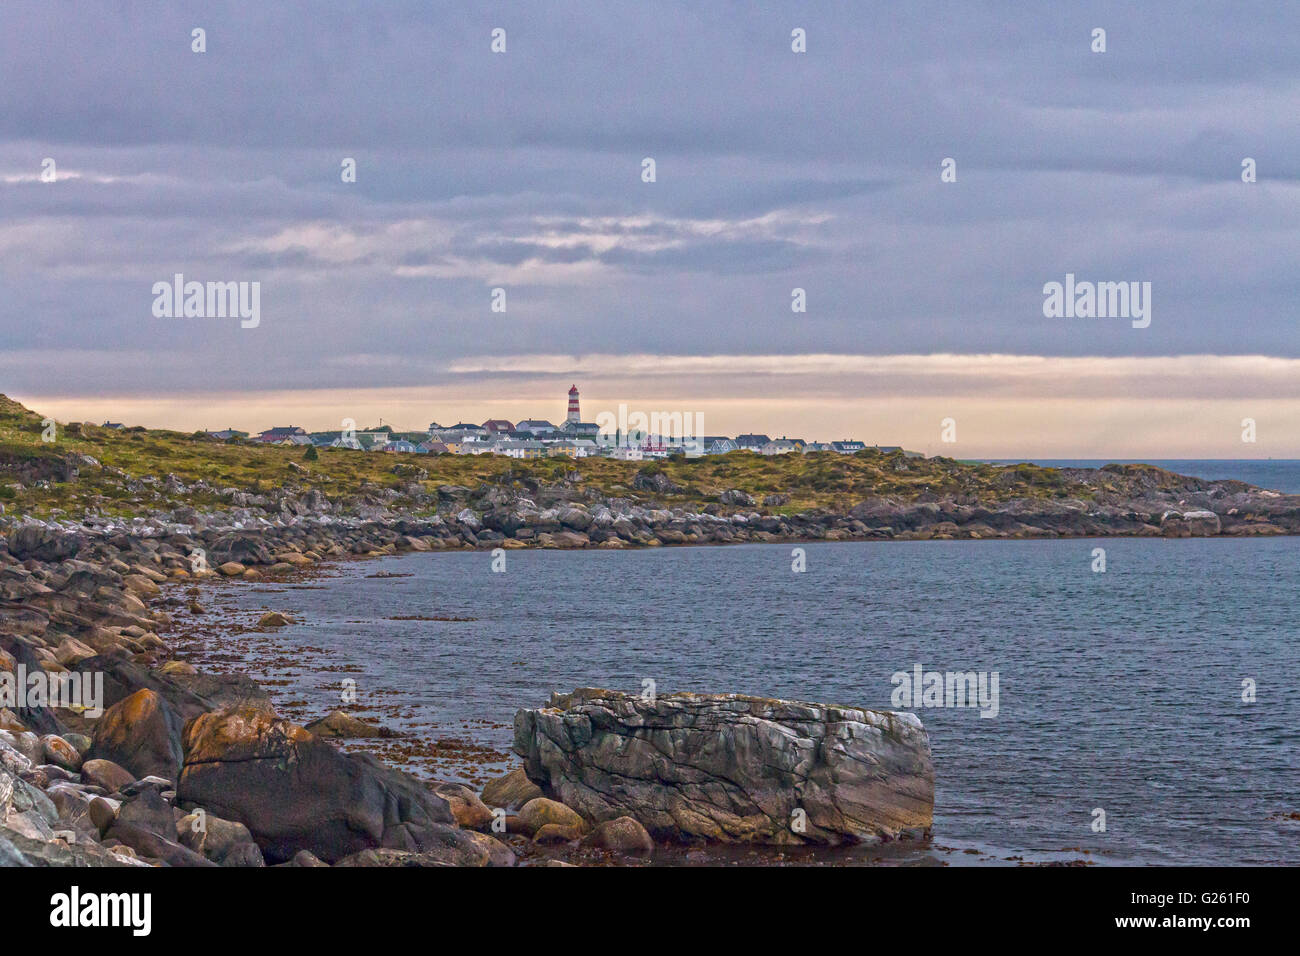 Alnes a fishing community at Godøy, Sunnmøre, Norway, harbouring one of Noway's most visited light houses. Stock Photo